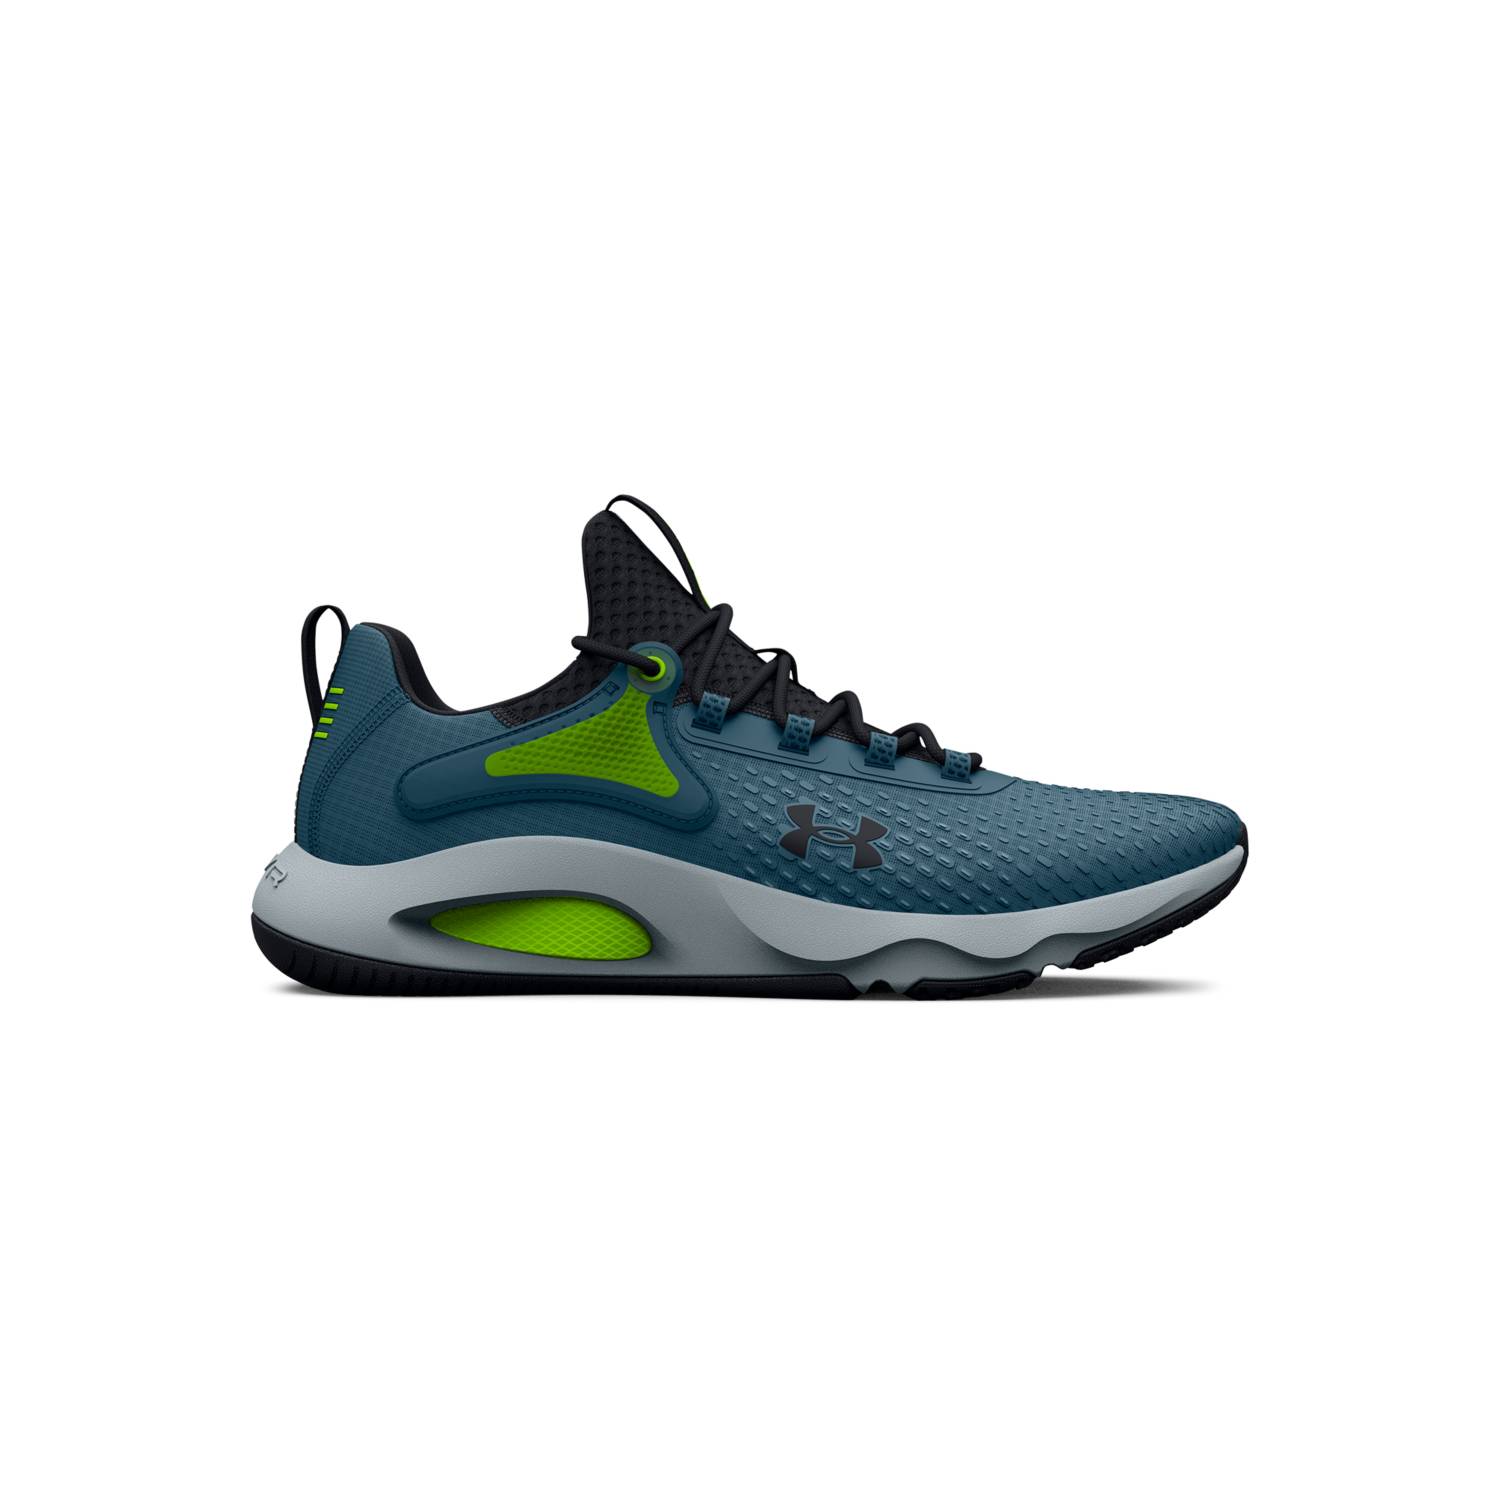 TENIS UNDER ARMOUR HOMBRE PROJECT ROCK BSR 3 3026462-402